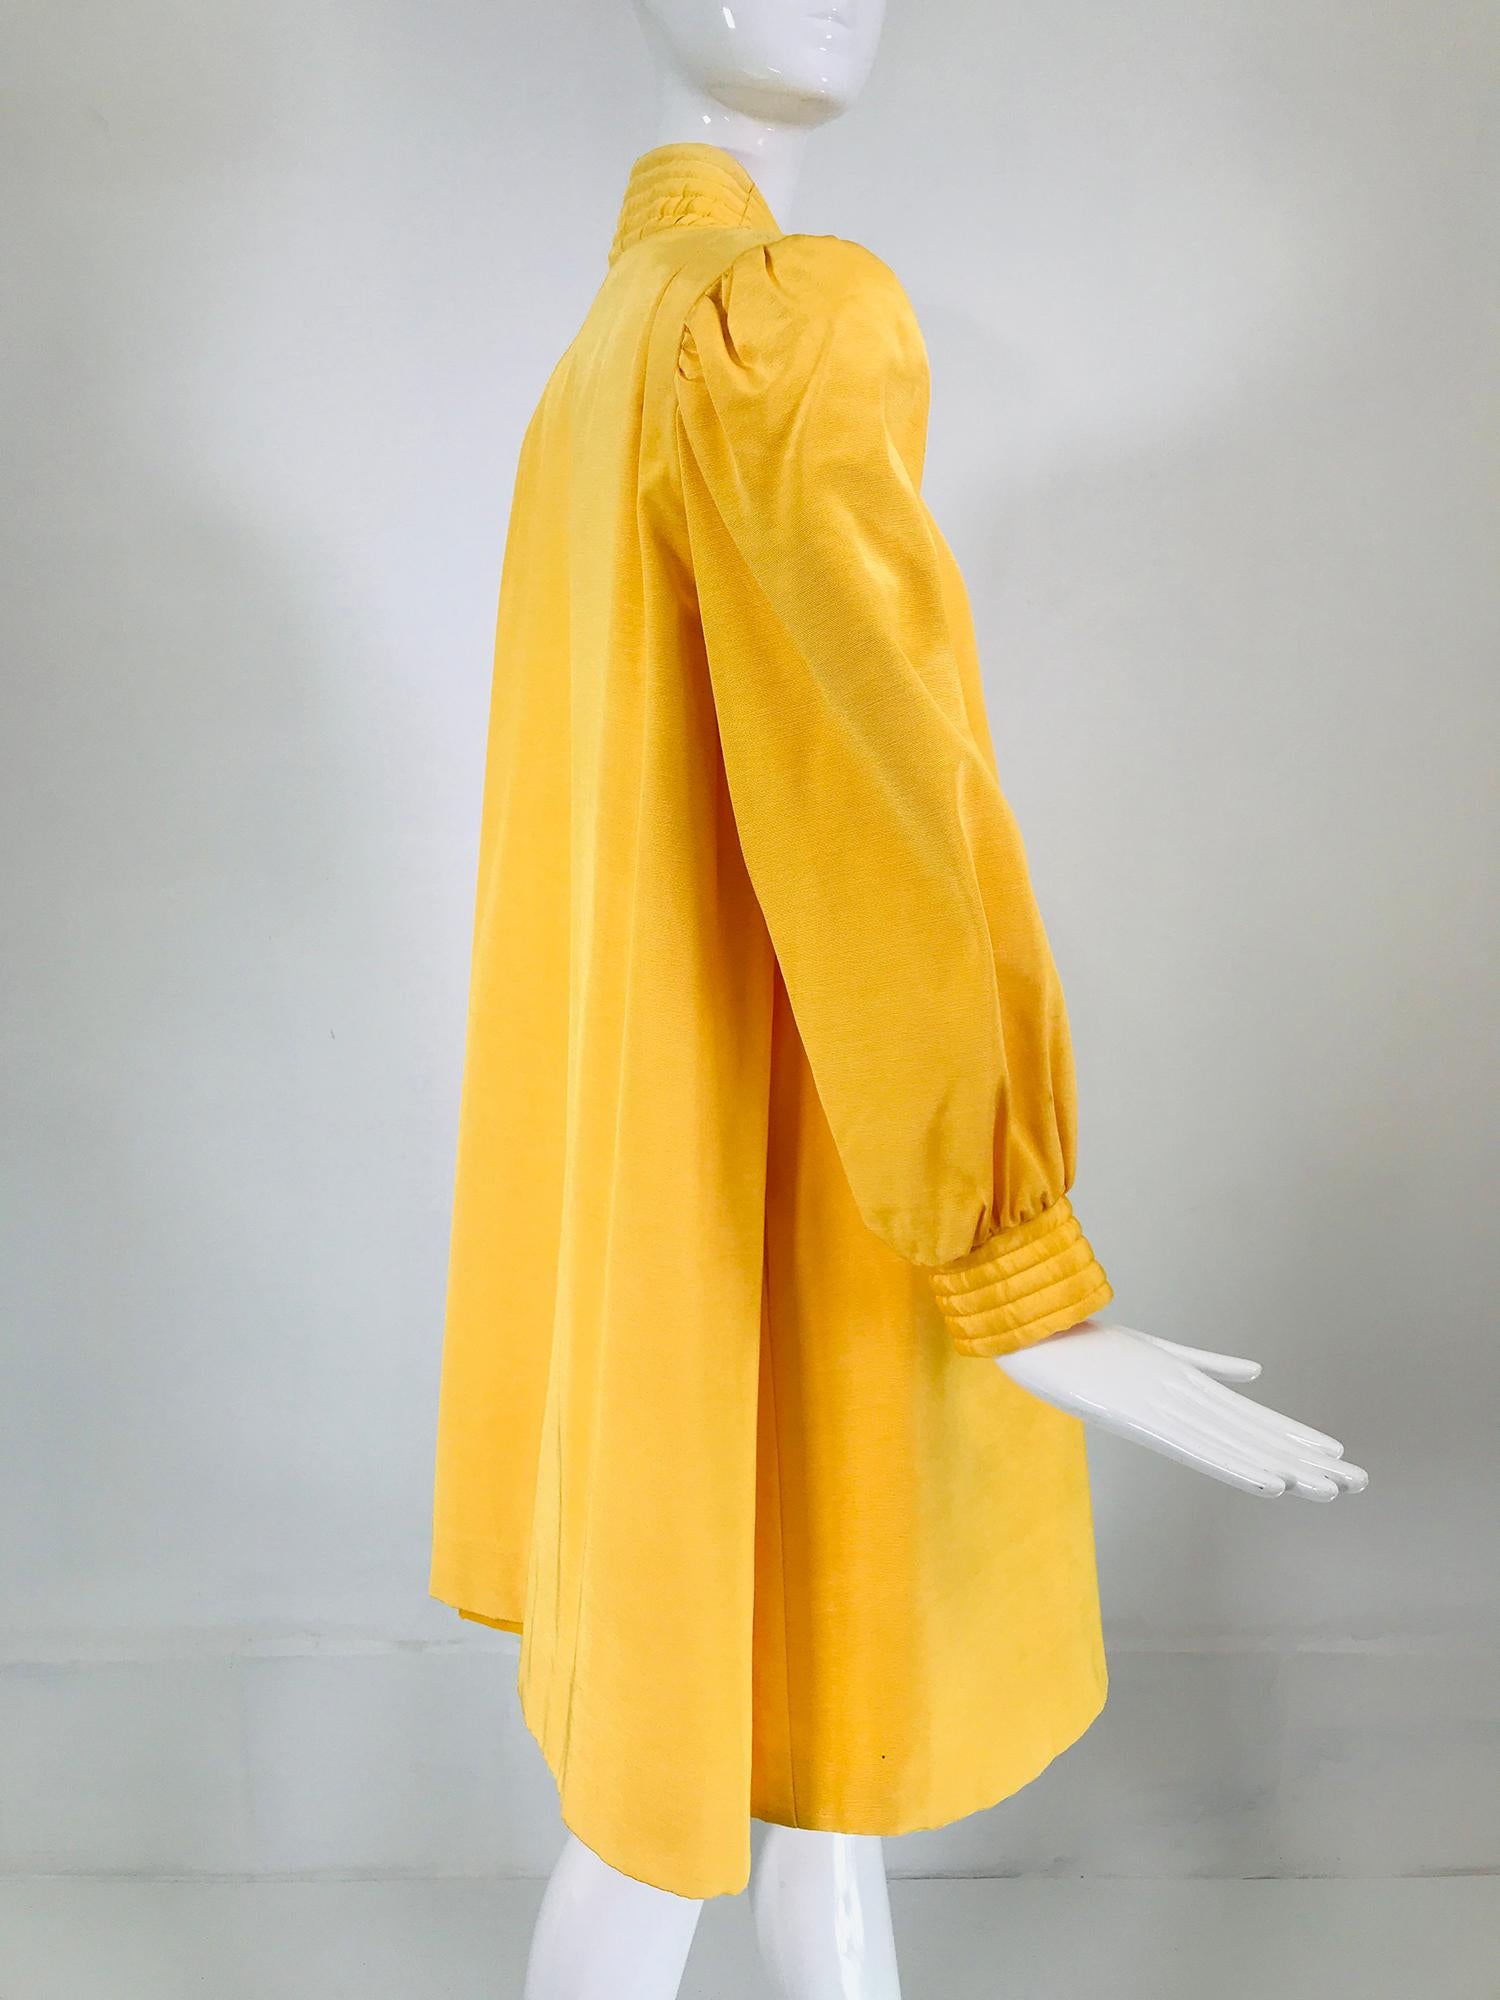 Victor Costa Mustard Yellow Faille Coat Quilted Facings & Cuffs 1980s For Sale 5